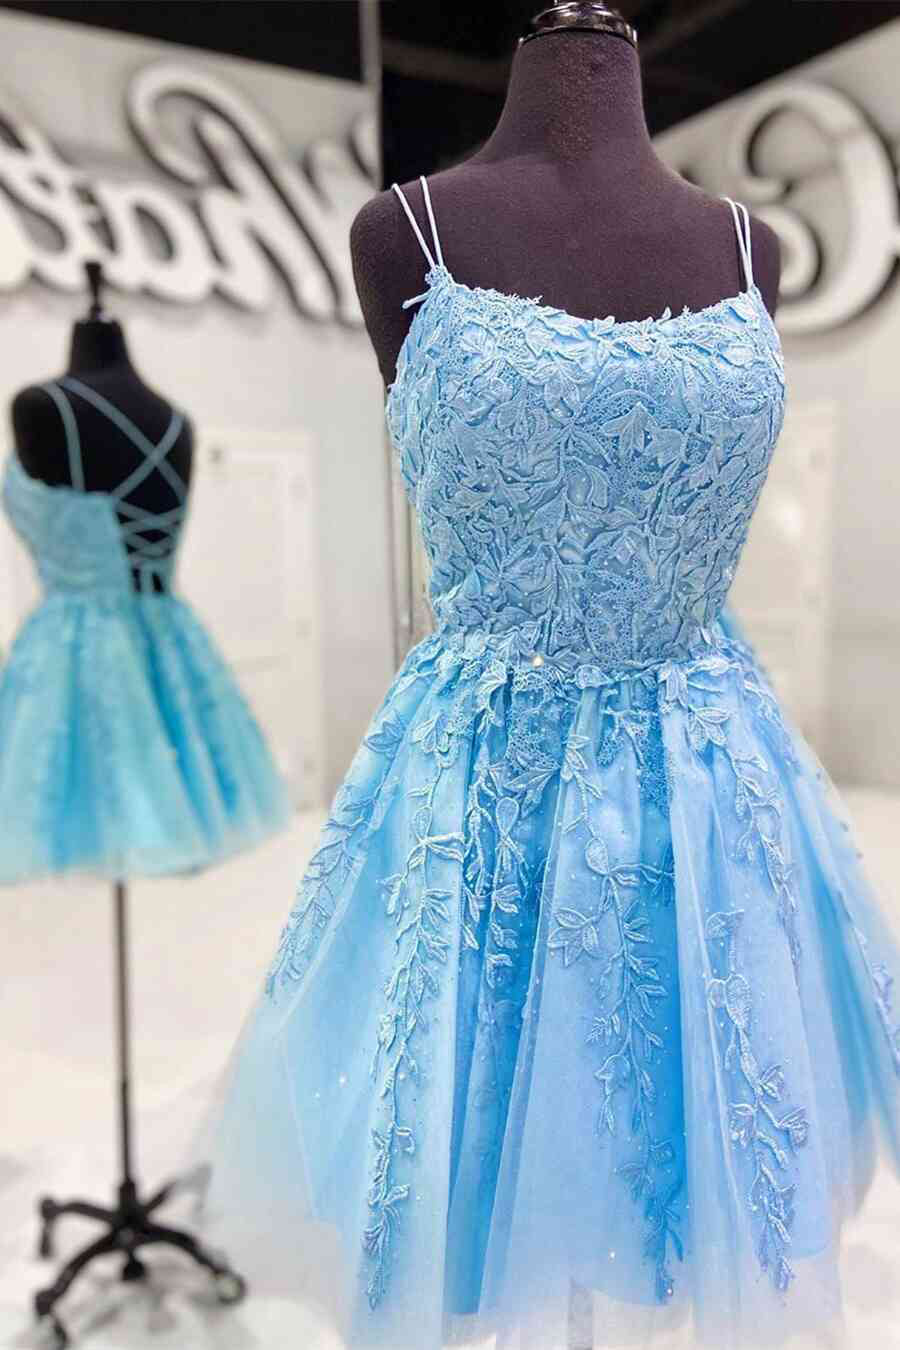 Products Blue A-line Spaghetti Straps Lace Short Prom Dresses, Homecoming Dresses